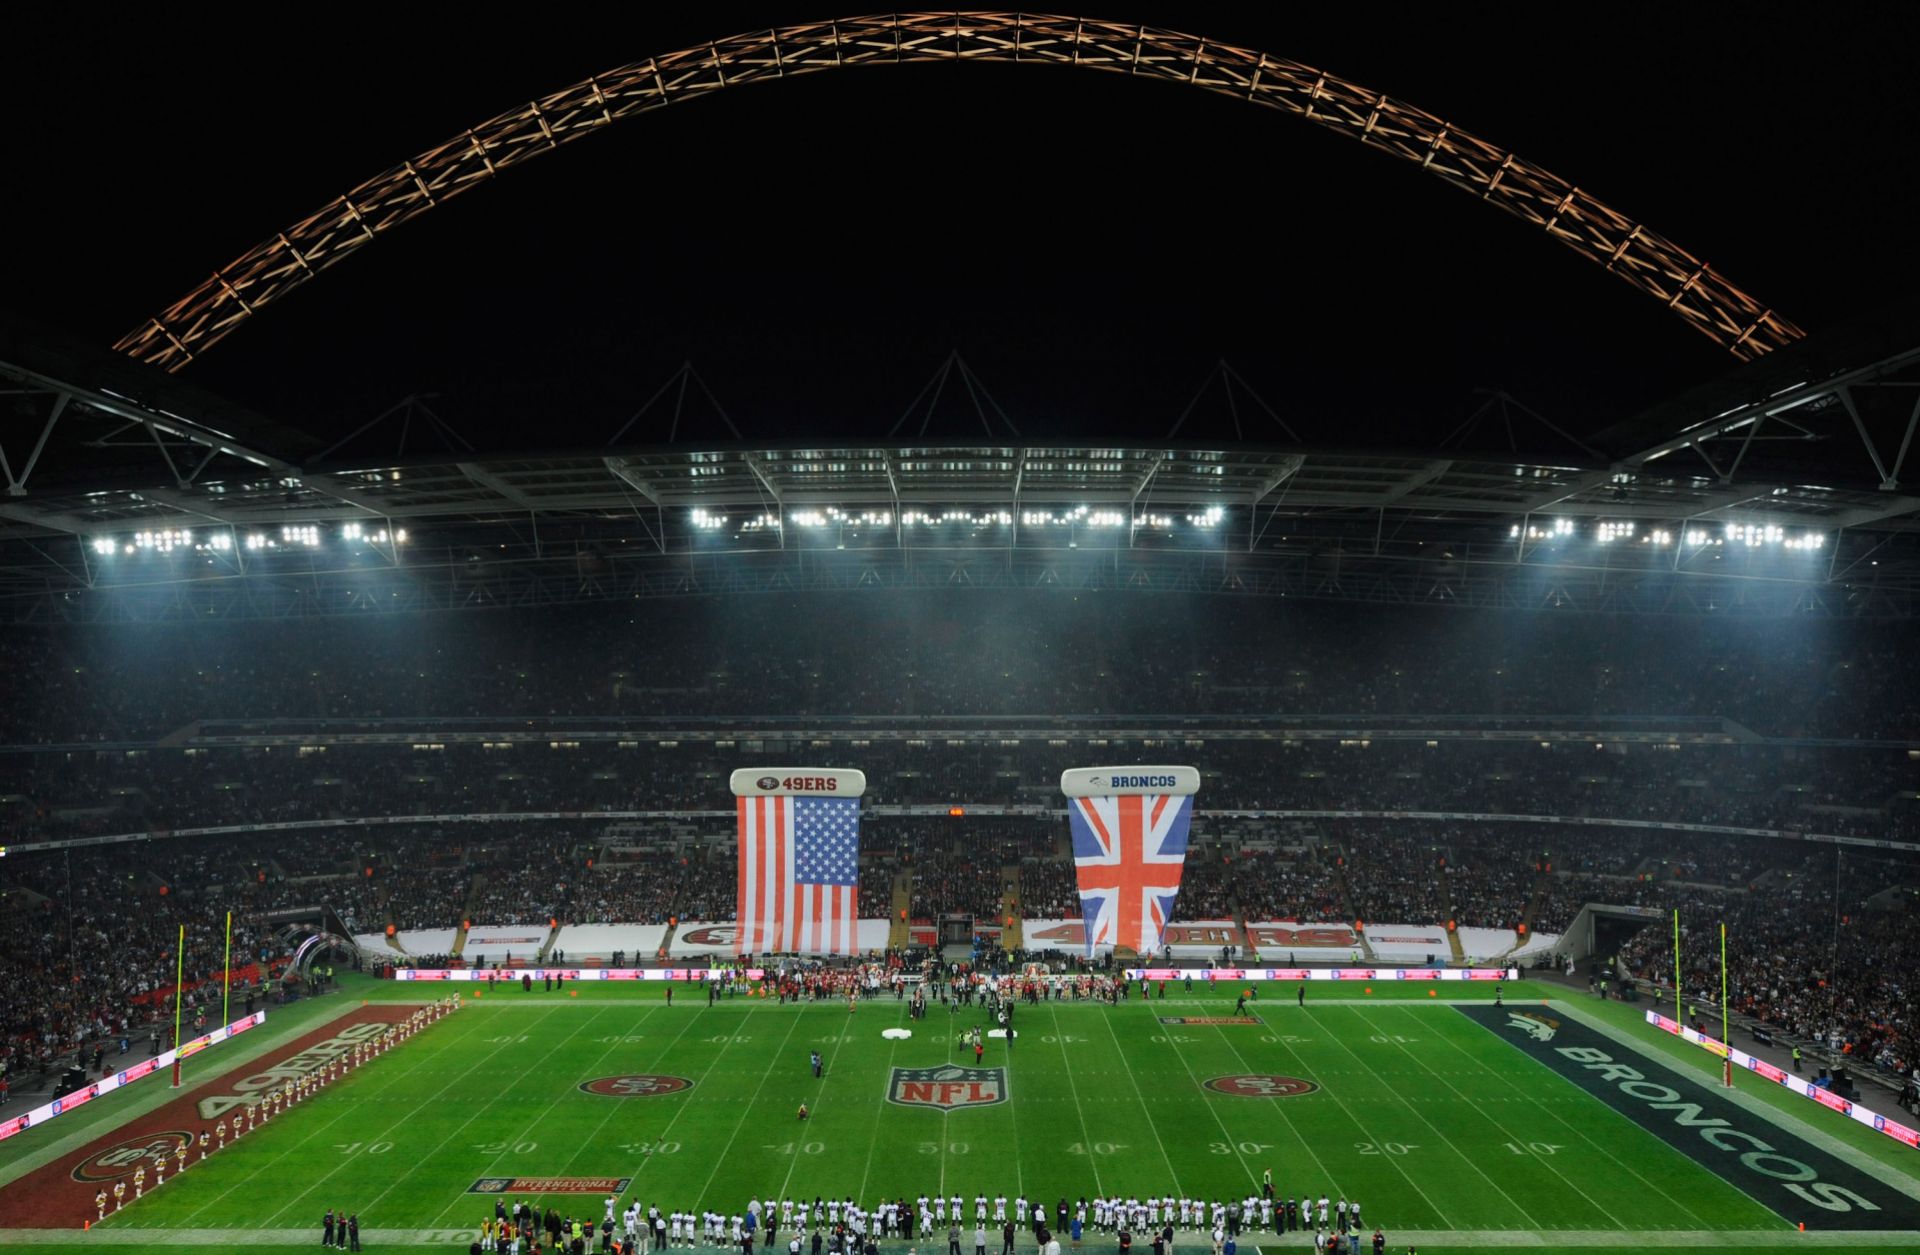 The Denver Broncos and San Francisco 49ers squared off for a game in London on Oct.31, 2010, as part of the NFL International Series, launched in 2007.